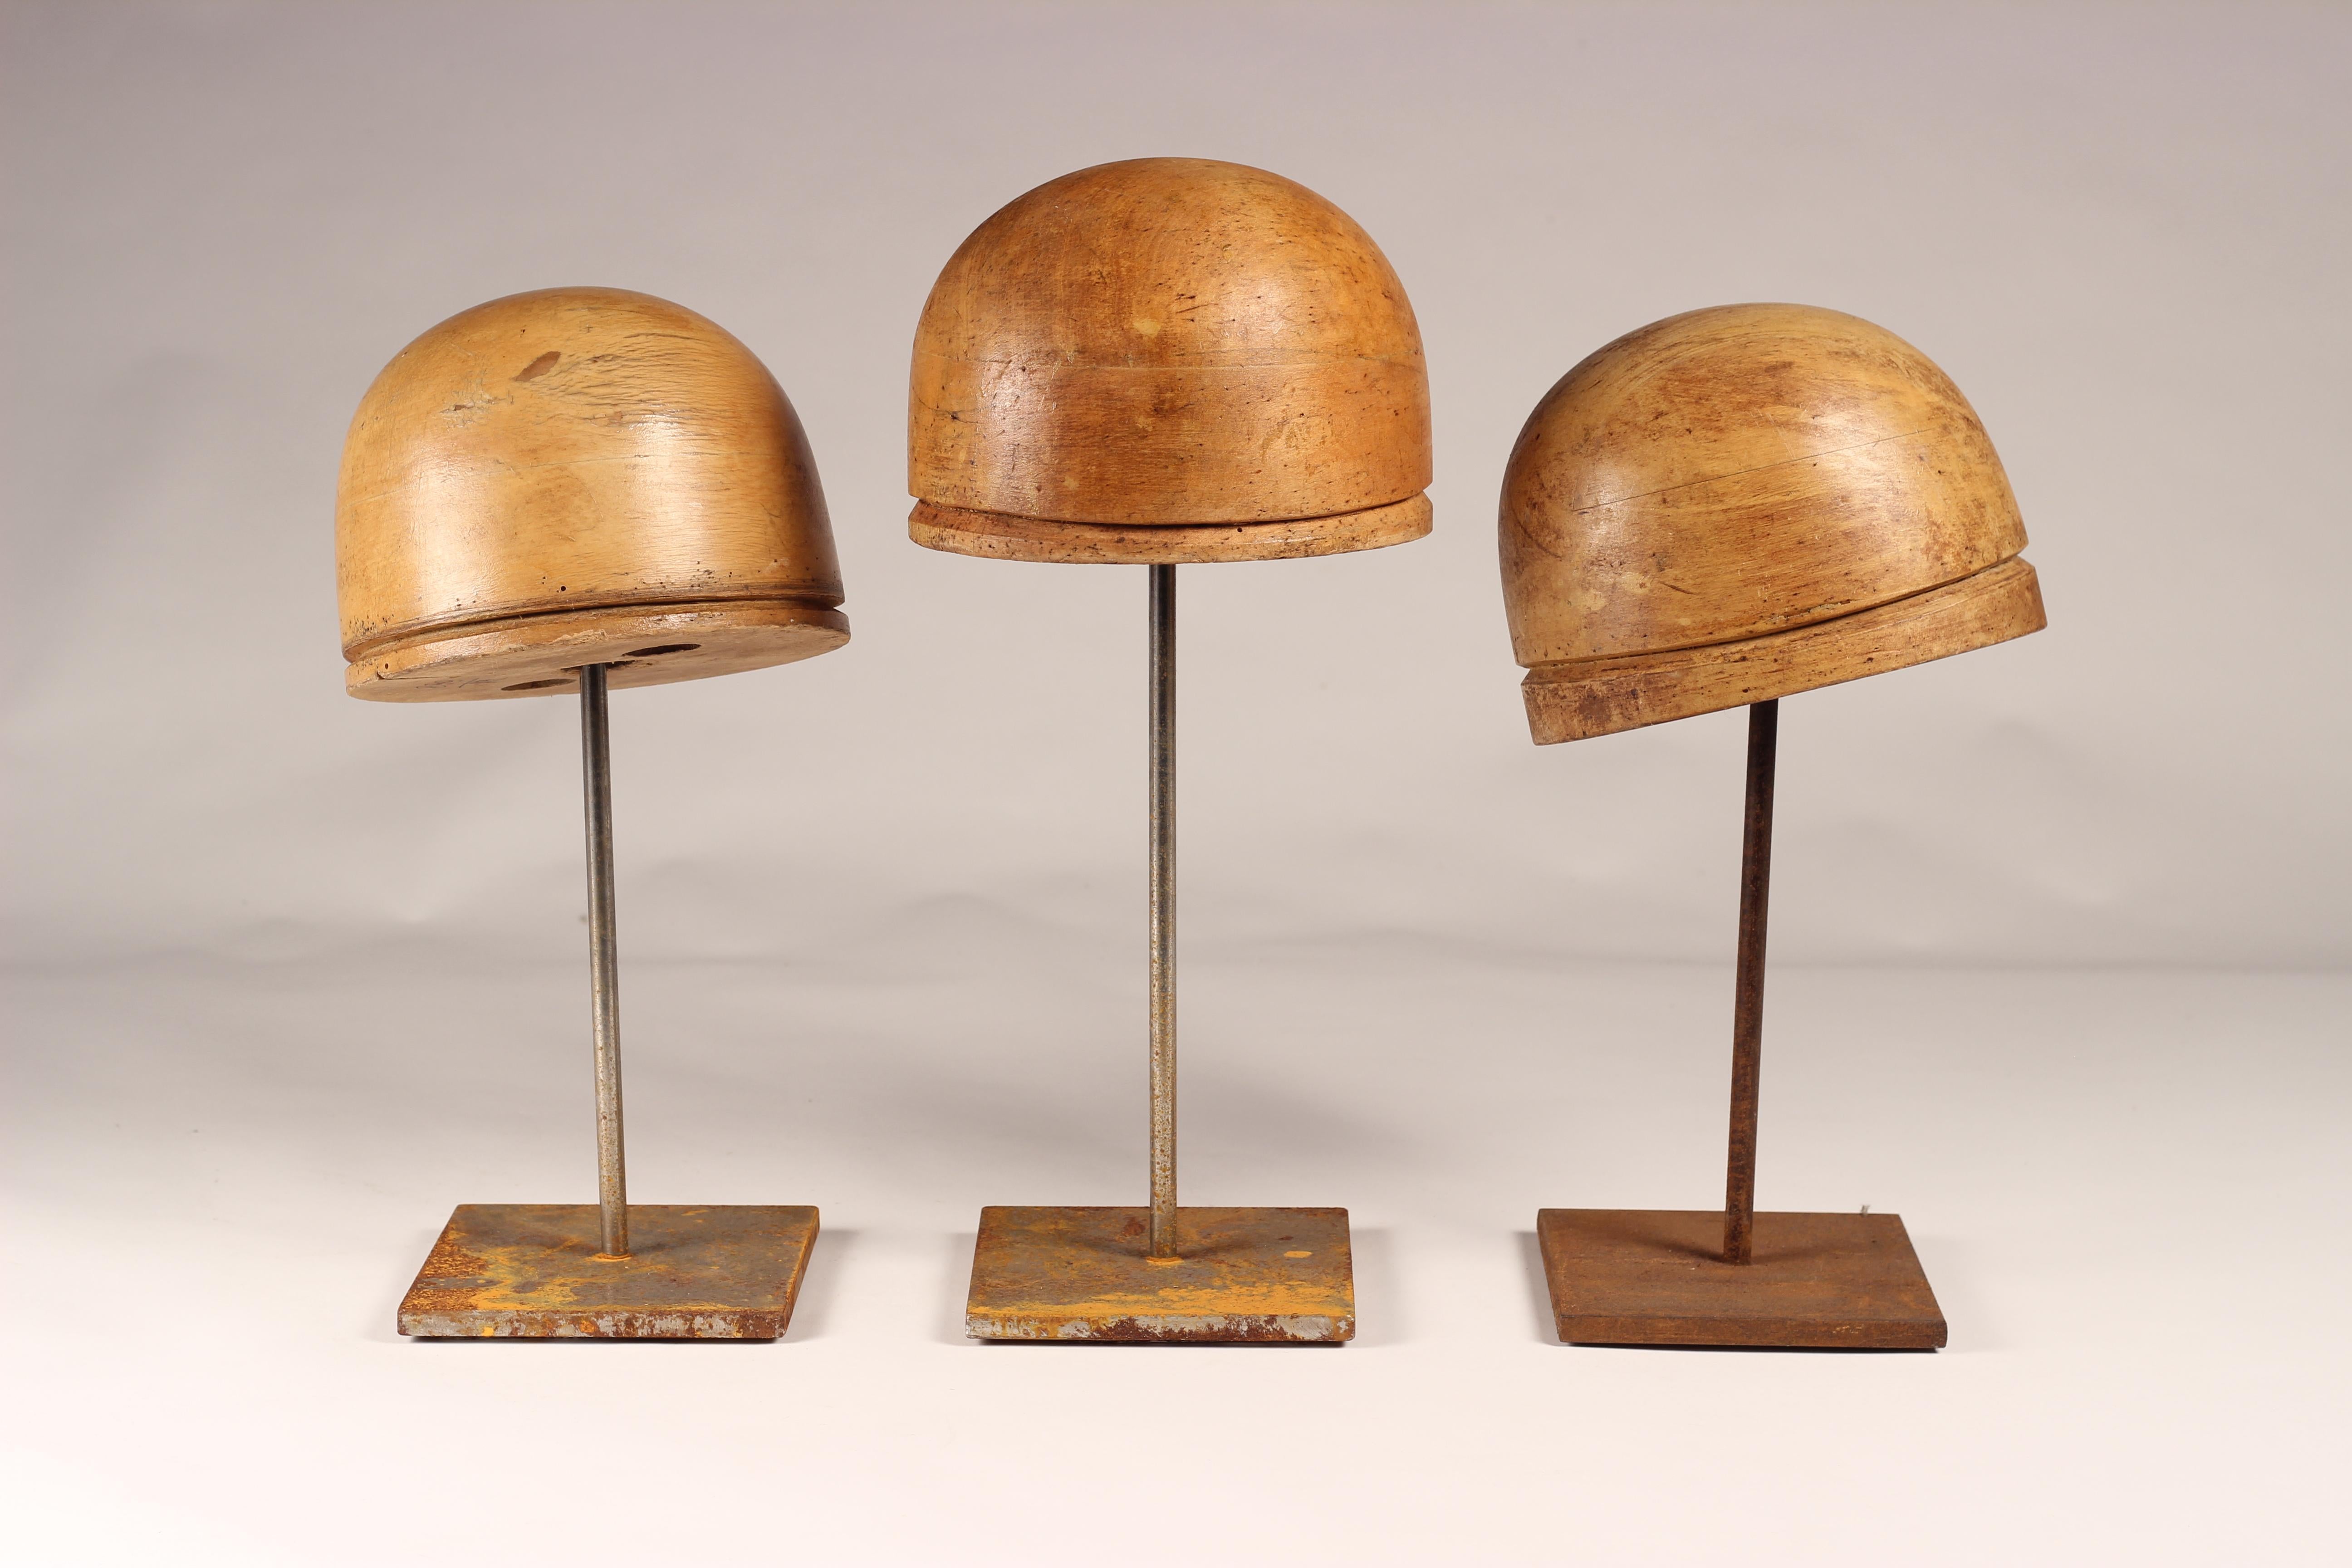 Steel Set of Three 19th Century Italian Milliners Hat Blocks from Florence Italy